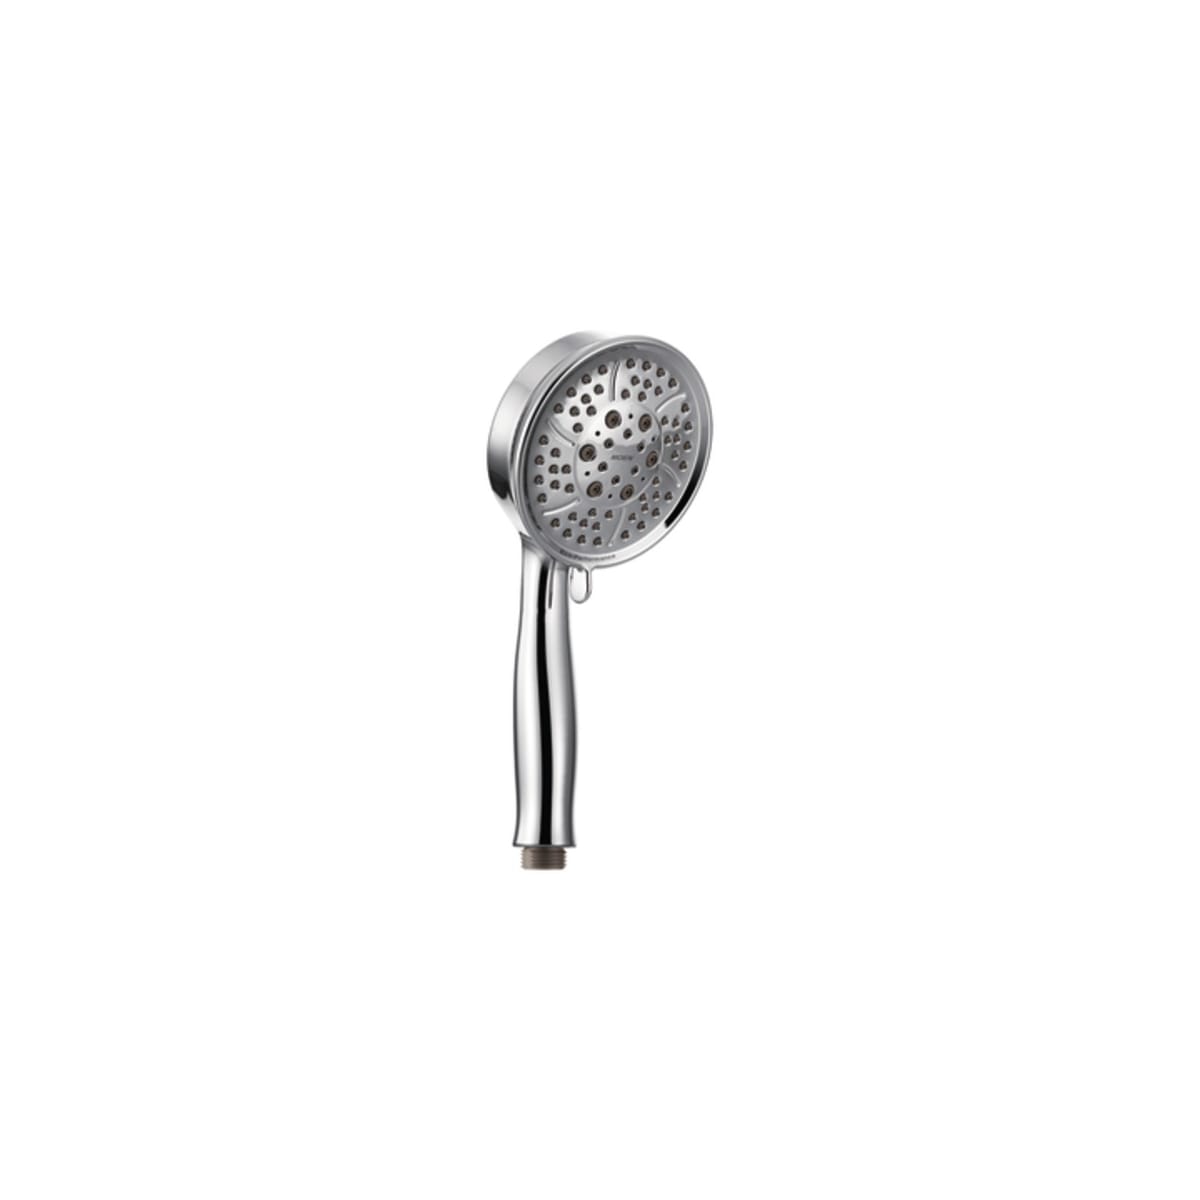 Moen 164927 Multi-Function Hand Shower with 4 Spray | Build.com